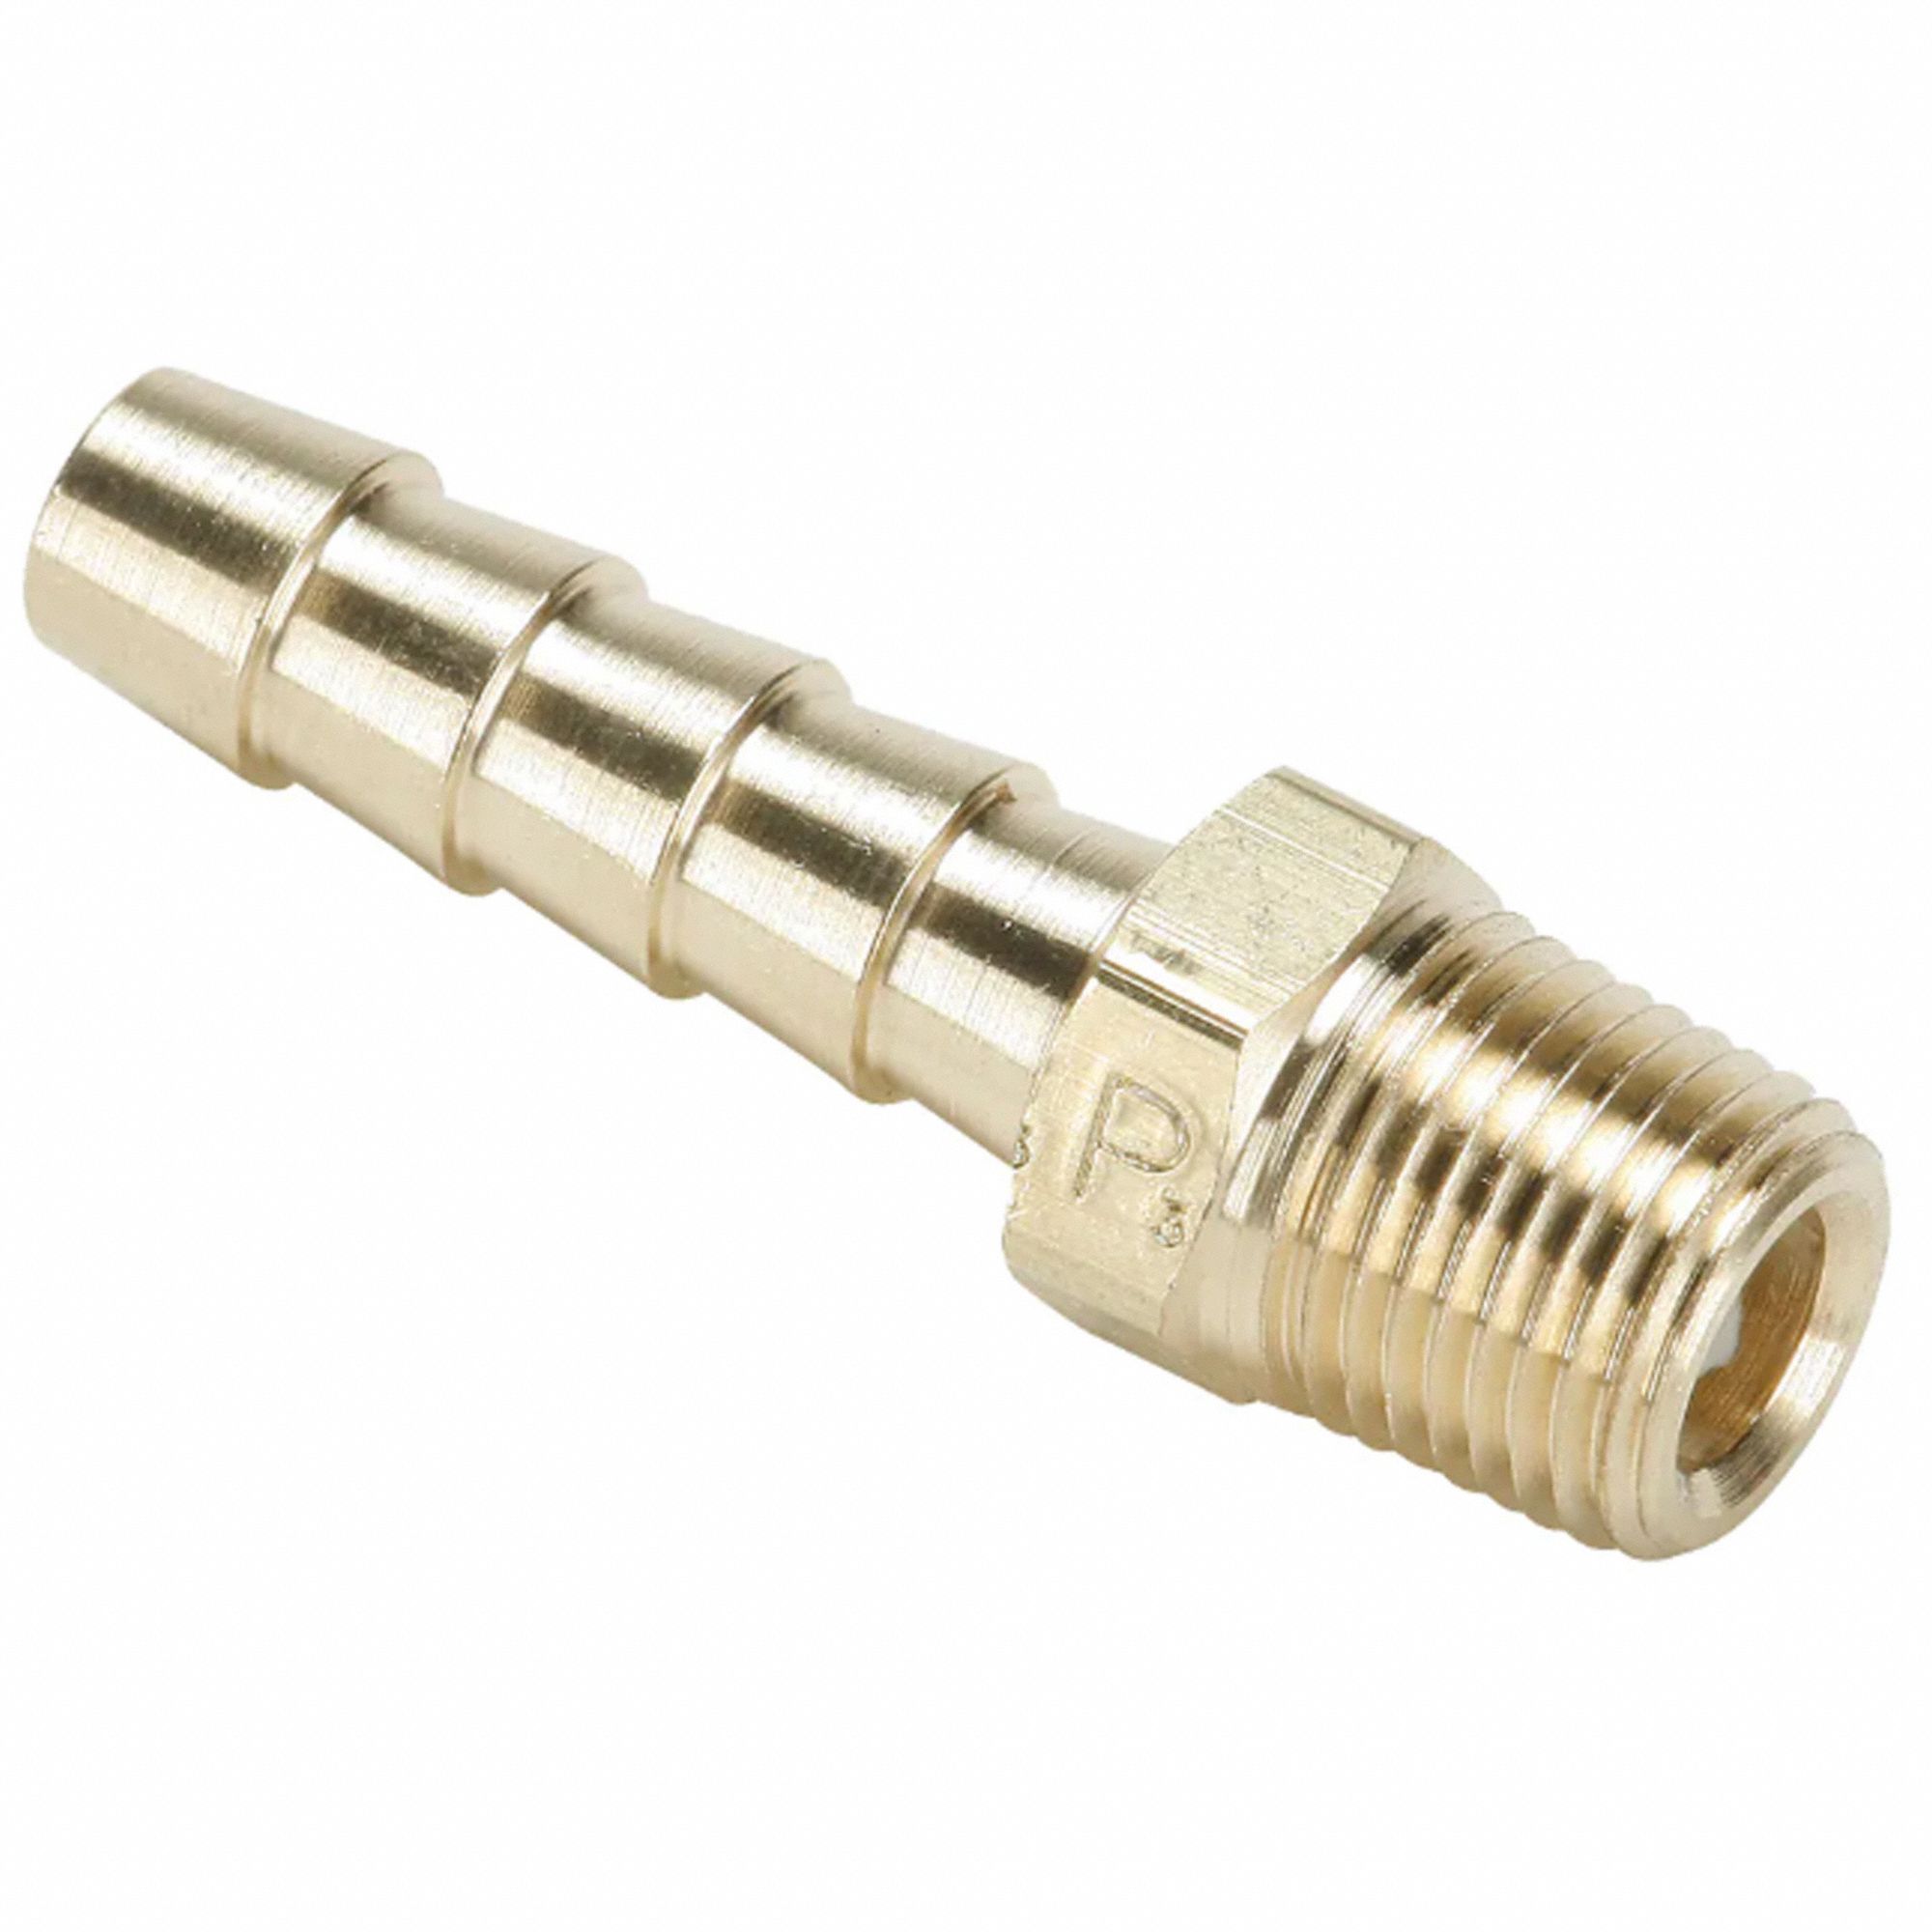 Parker Pipe Fittings, Brass Fittings & Adapters